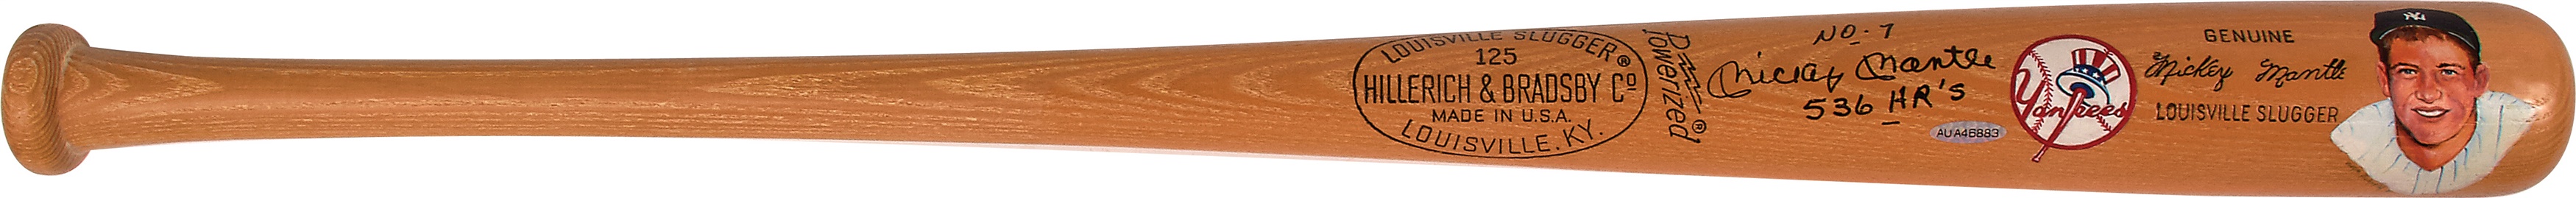 Mantle and Maris - Mickey Mantle Signed Bat with Hand Painted Portrait